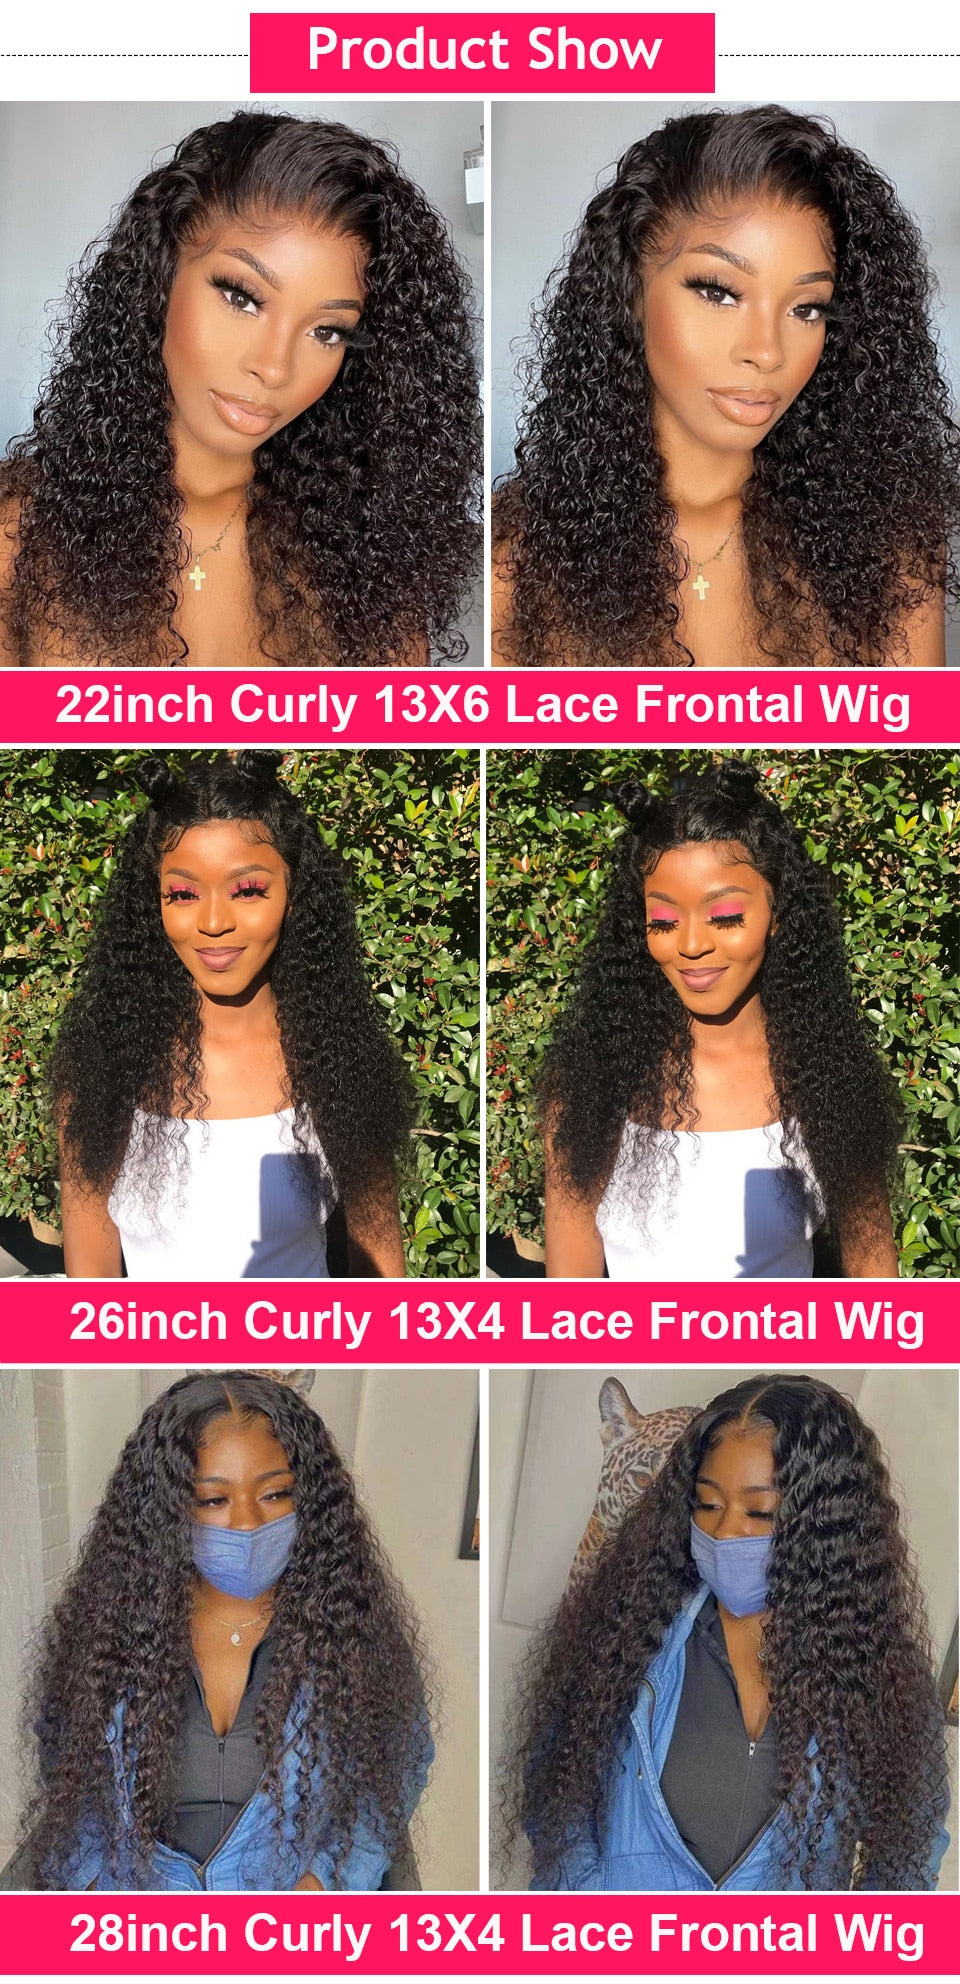 Curly Human Hair Wig 13X6 Lace Frontal Wig Pre Plucked 13X4 Kinky Curly Lace Front Wig 250 Density Lace Front Human Hair Wigs